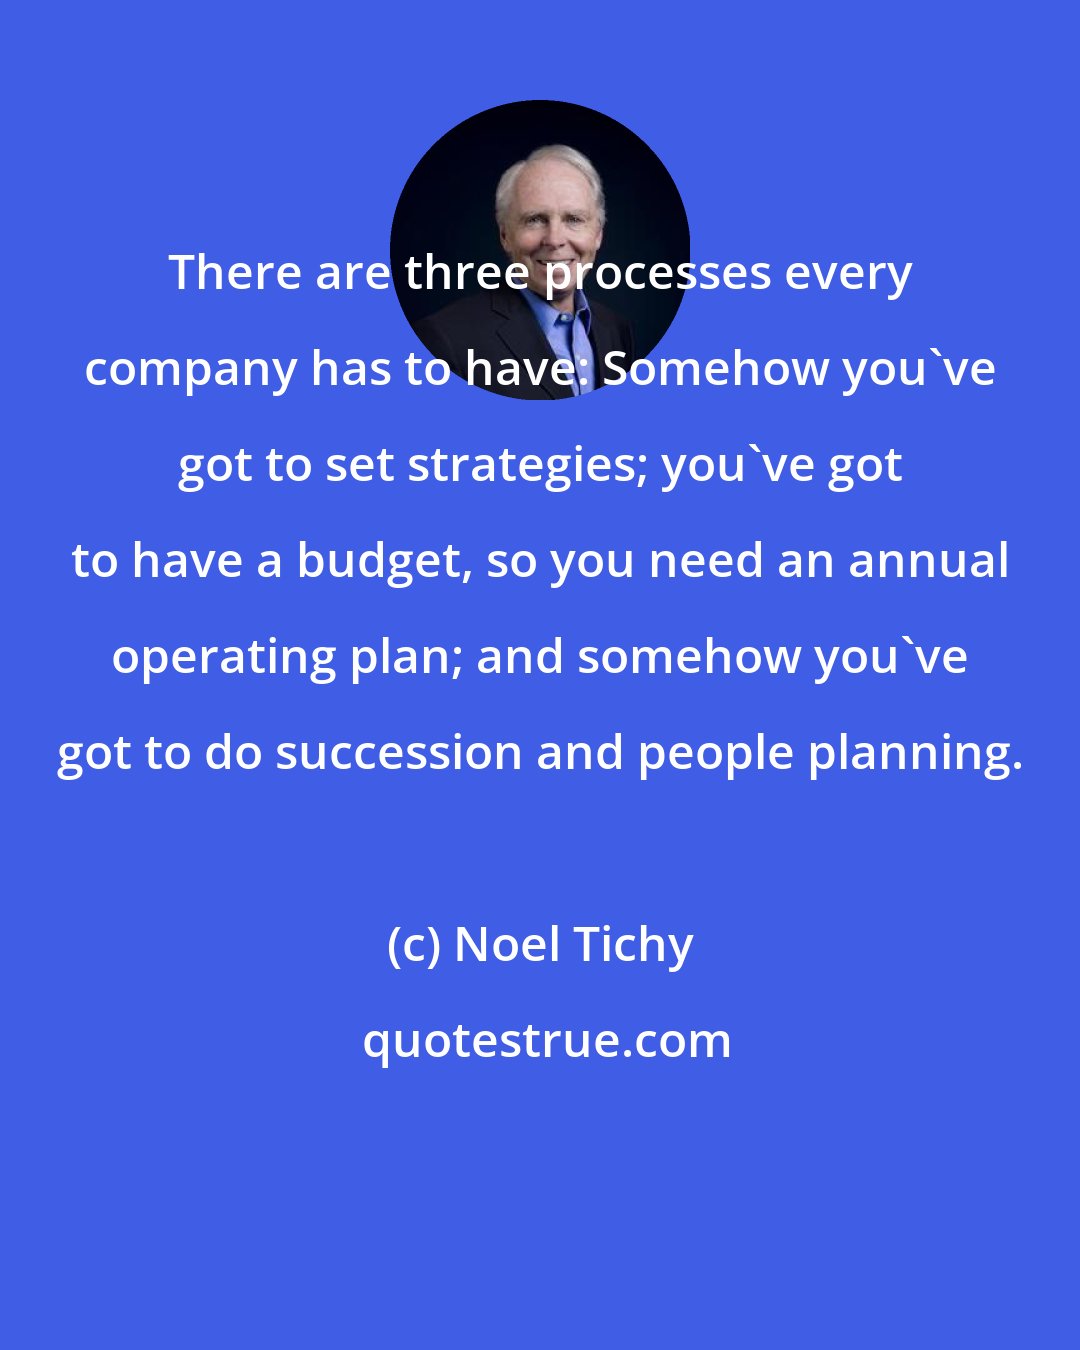 Noel Tichy: There are three processes every company has to have: Somehow you've got to set strategies; you've got to have a budget, so you need an annual operating plan; and somehow you've got to do succession and people planning.